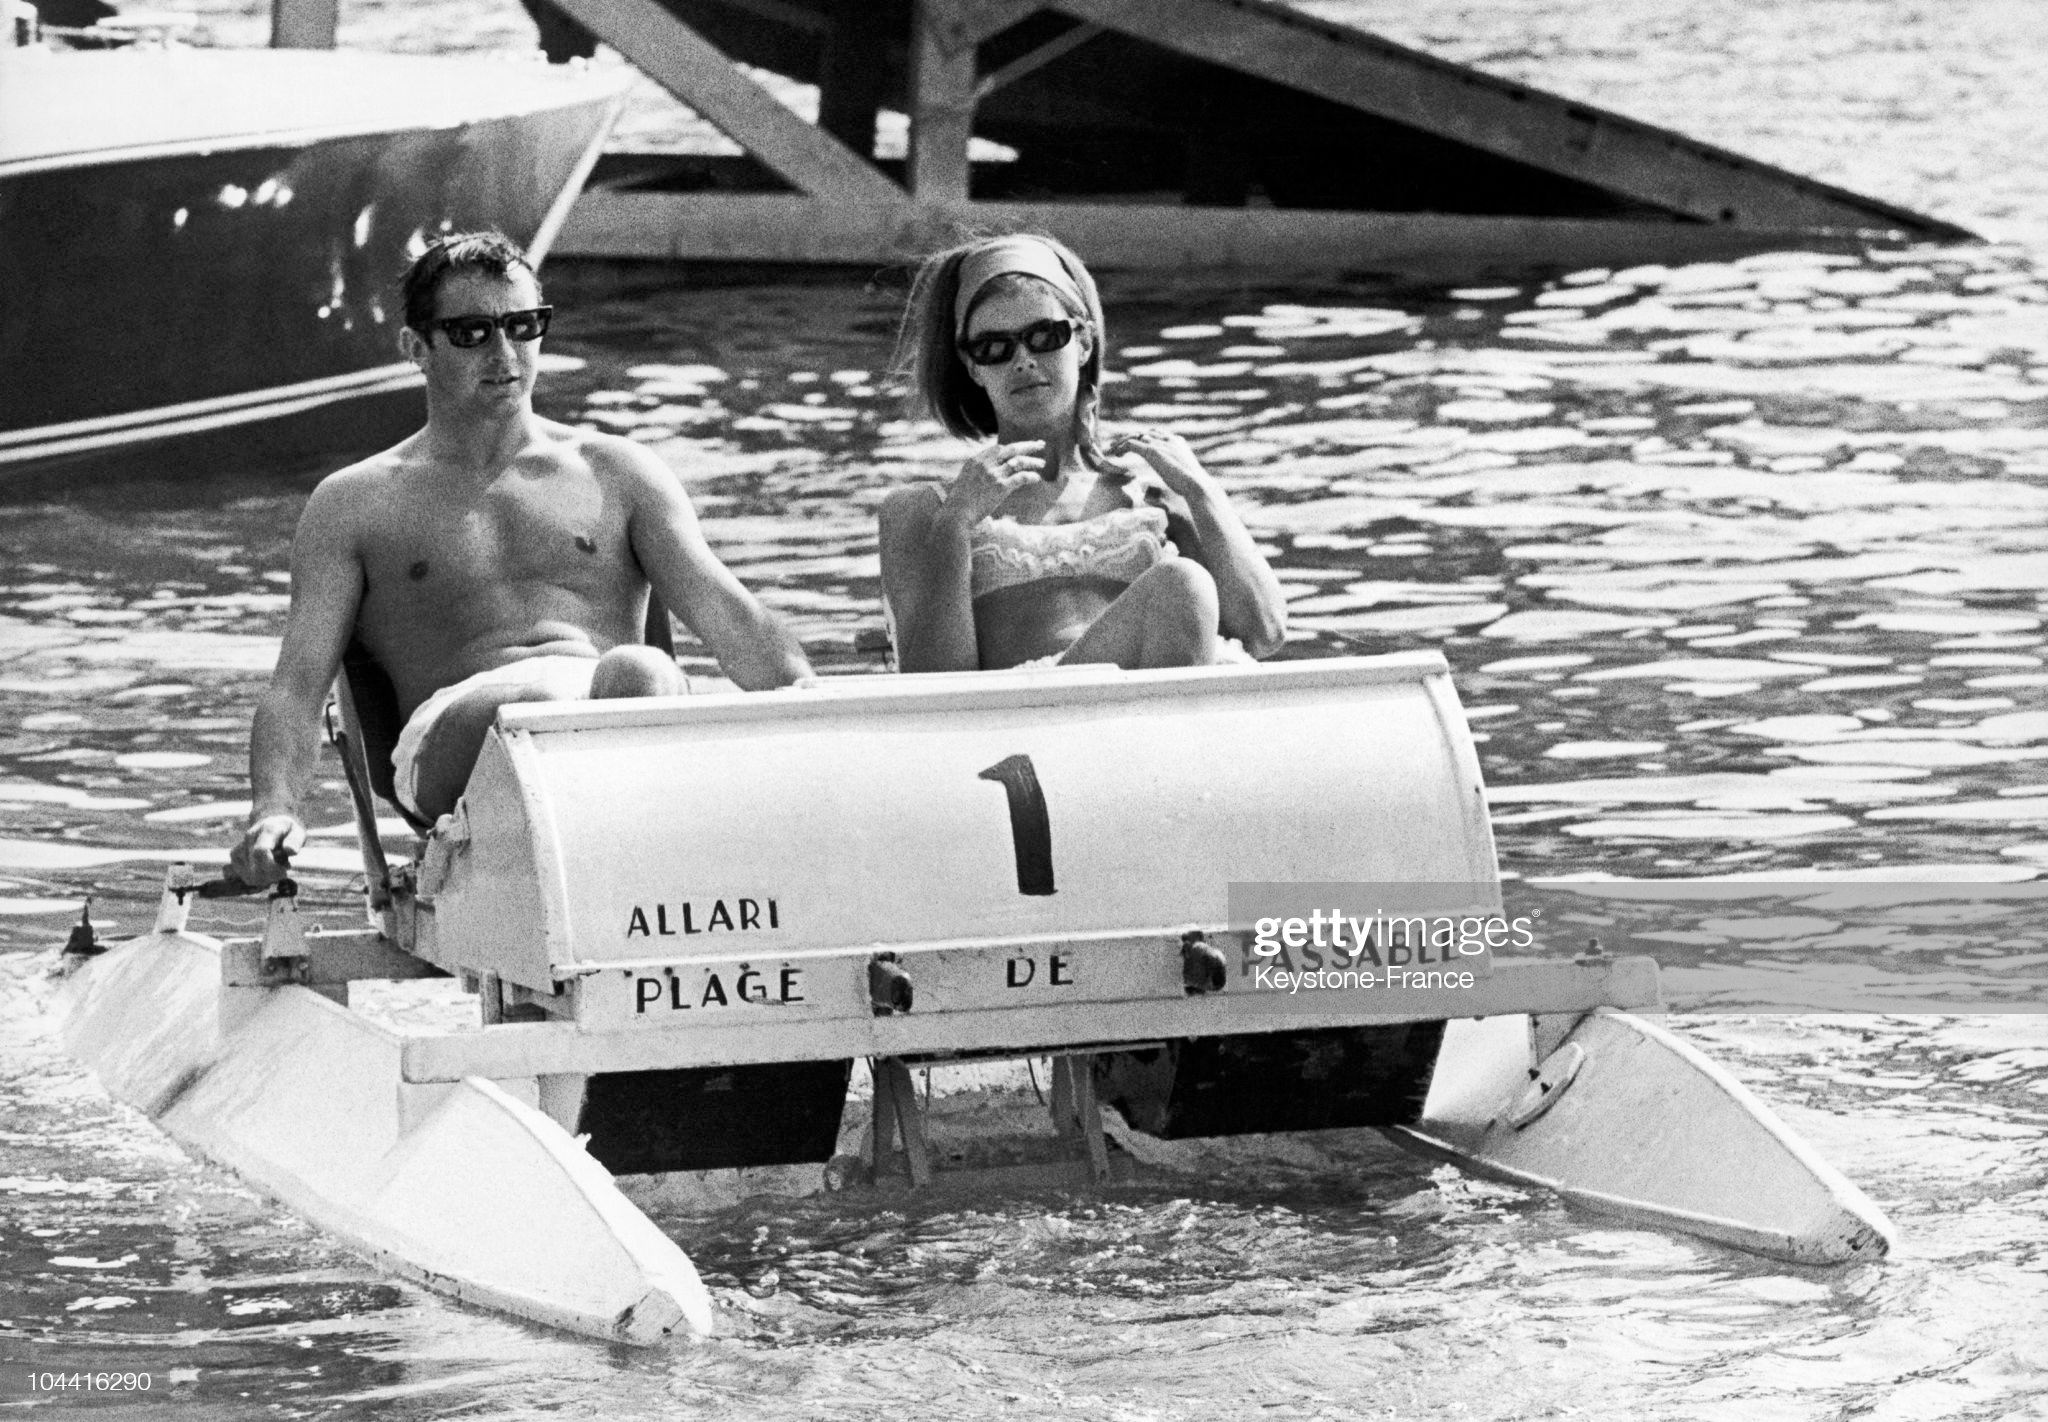 The winner of the Monaco Grand Prix Jackie Stewart and his wife Helen relaxing in a pedal boat in Monaco on May 23, 1966.